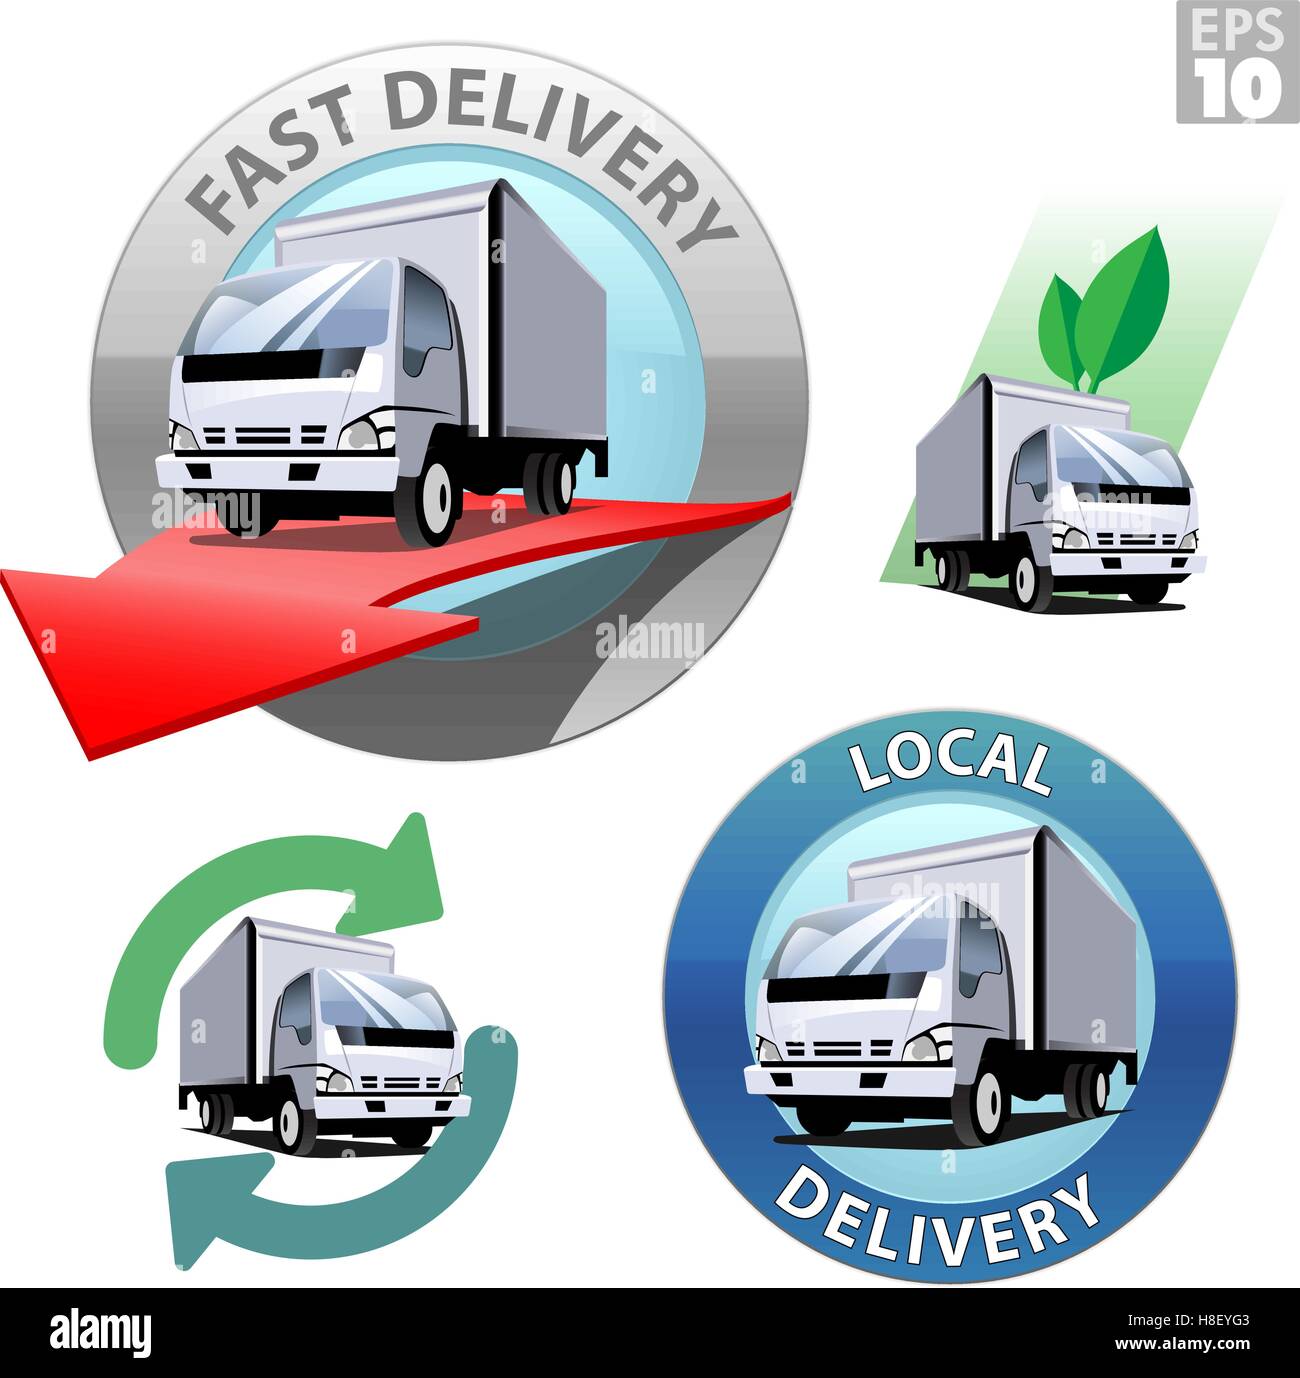 Truck for local delivery, fast delivery, recycle and eco friendly transportation Stock Vector